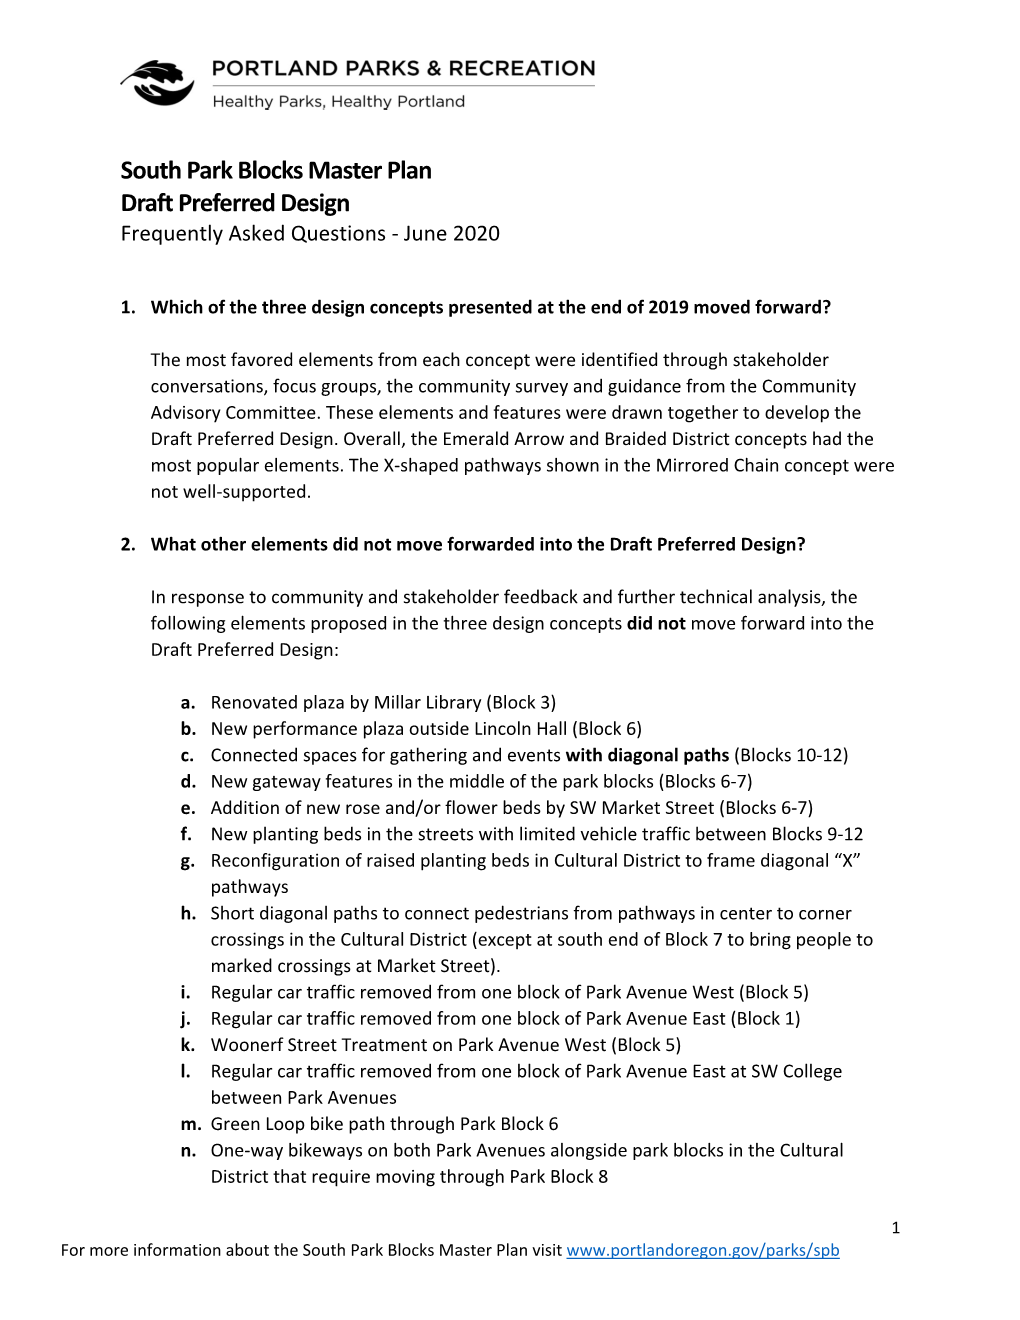 South Park Blocks Master Plan Draft Preferred Design Frequently Asked Questions - June 2020